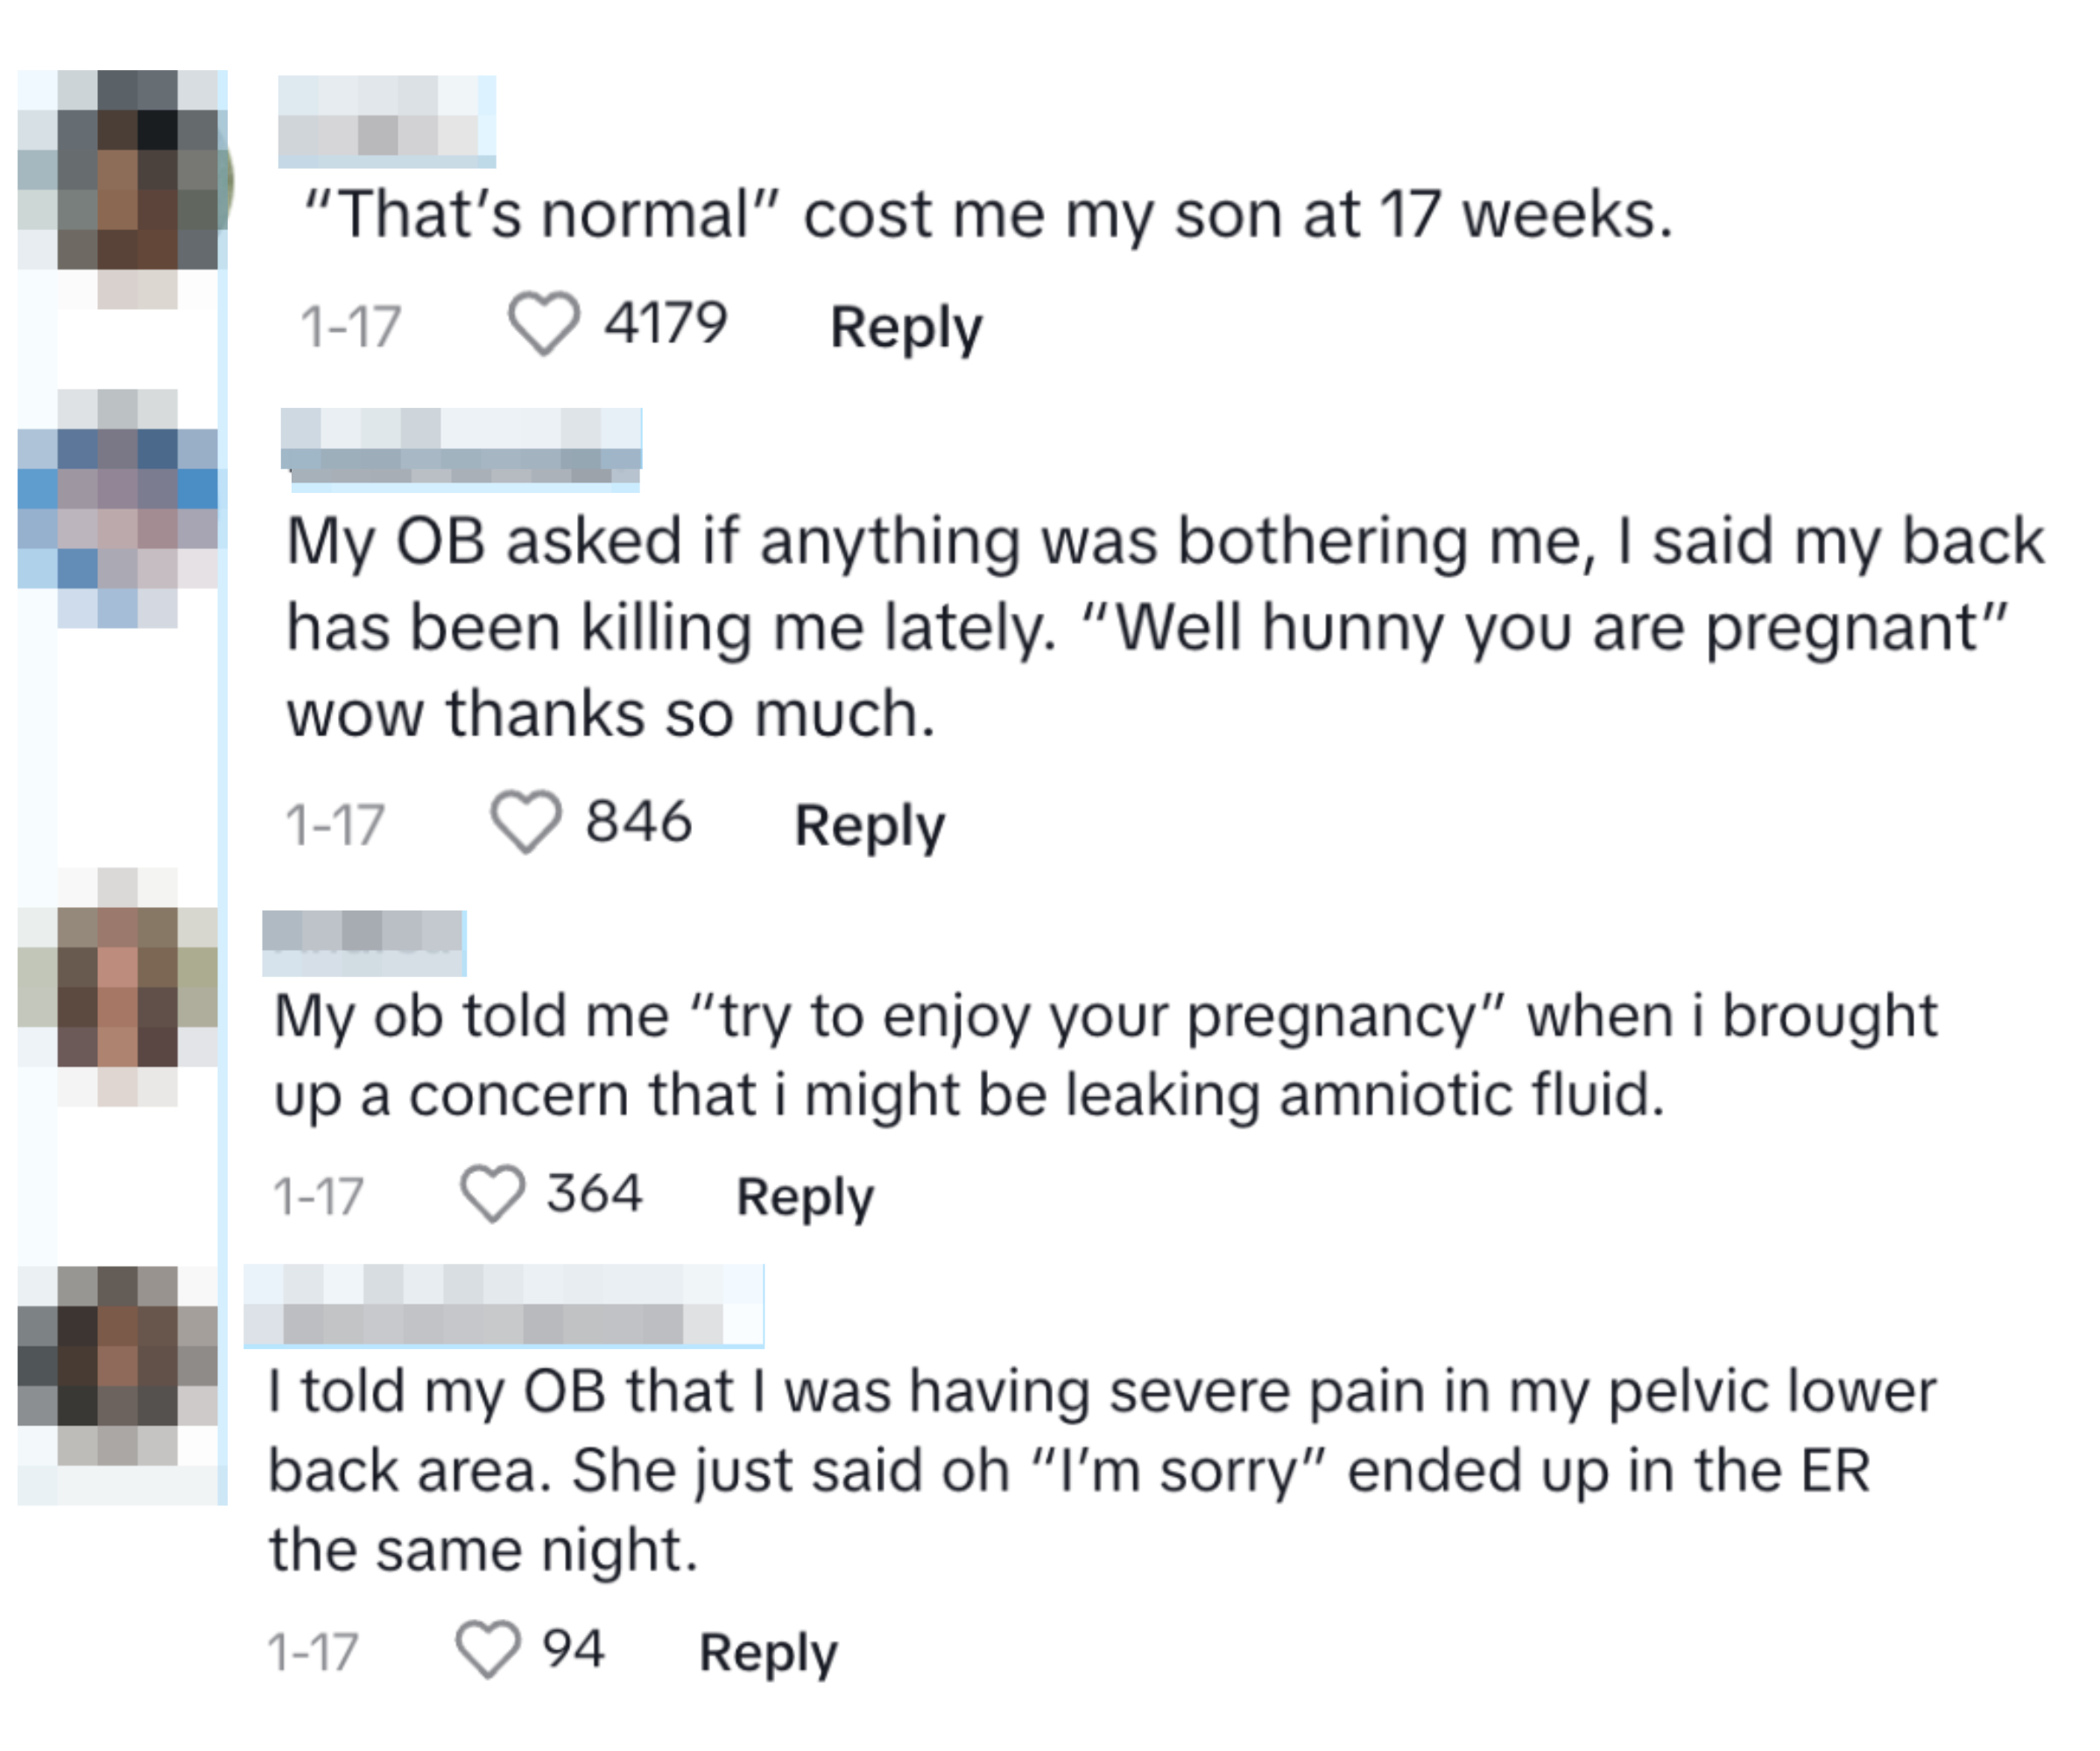 Comments, including &quot;My OB asked if anything was bothering me, I said my back has been killing me lately; &#x27;Well hunny you are pregnant&#x27;&quot; and &quot;My ob told me &#x27;try to enjoy your pregnancy&#x27; when i brought up that I might be leaking amniotic fluid&quot;